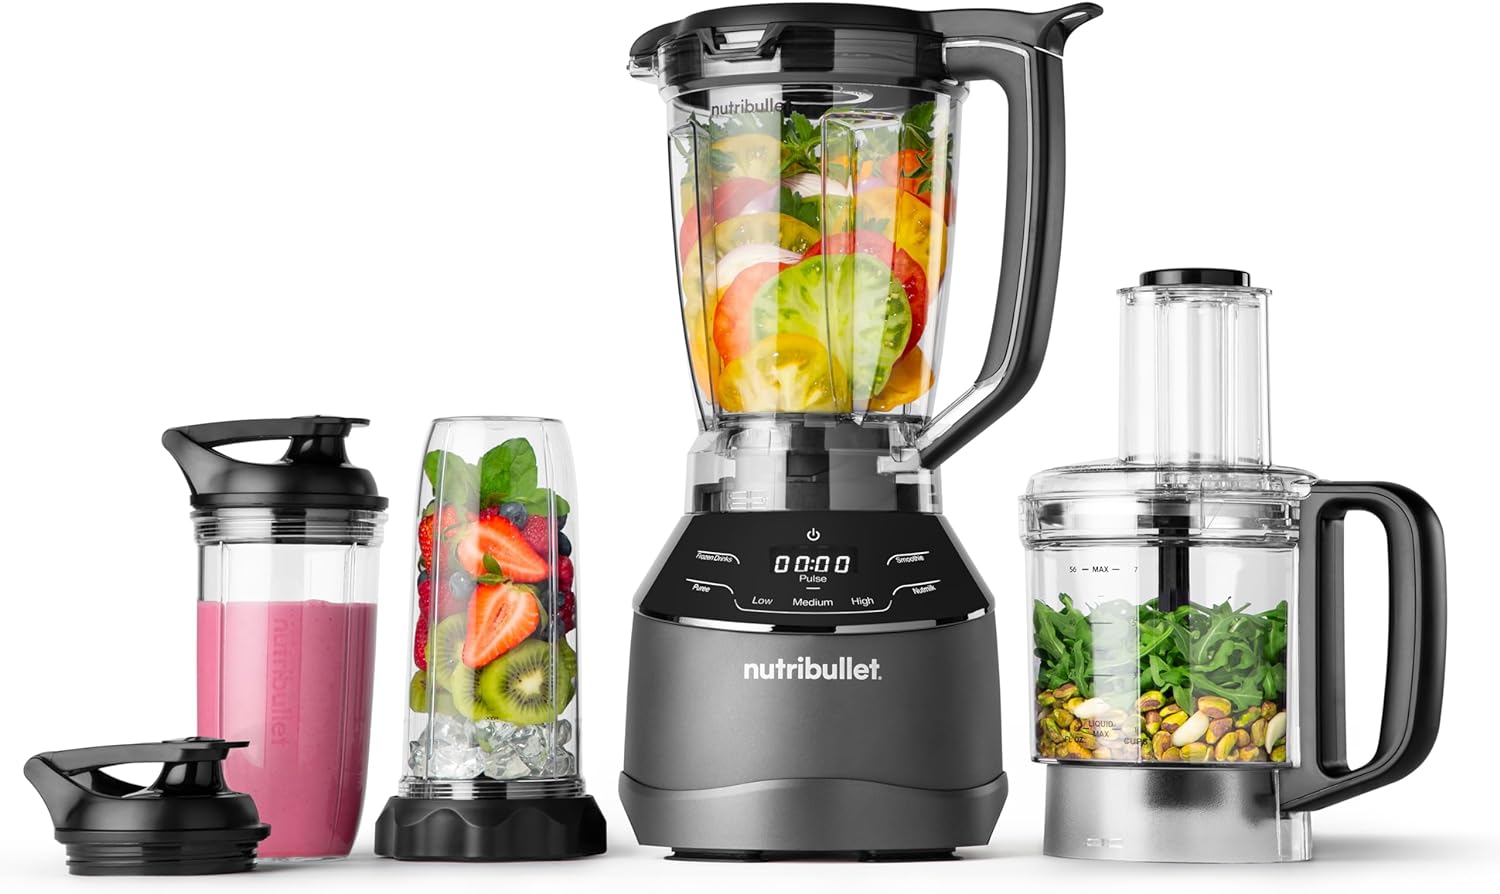 Dropship Nutribullet 500 Watt Personal Blender 24 Oz 3pc Gloss Sky Blue to  Sell Online at a Lower Price